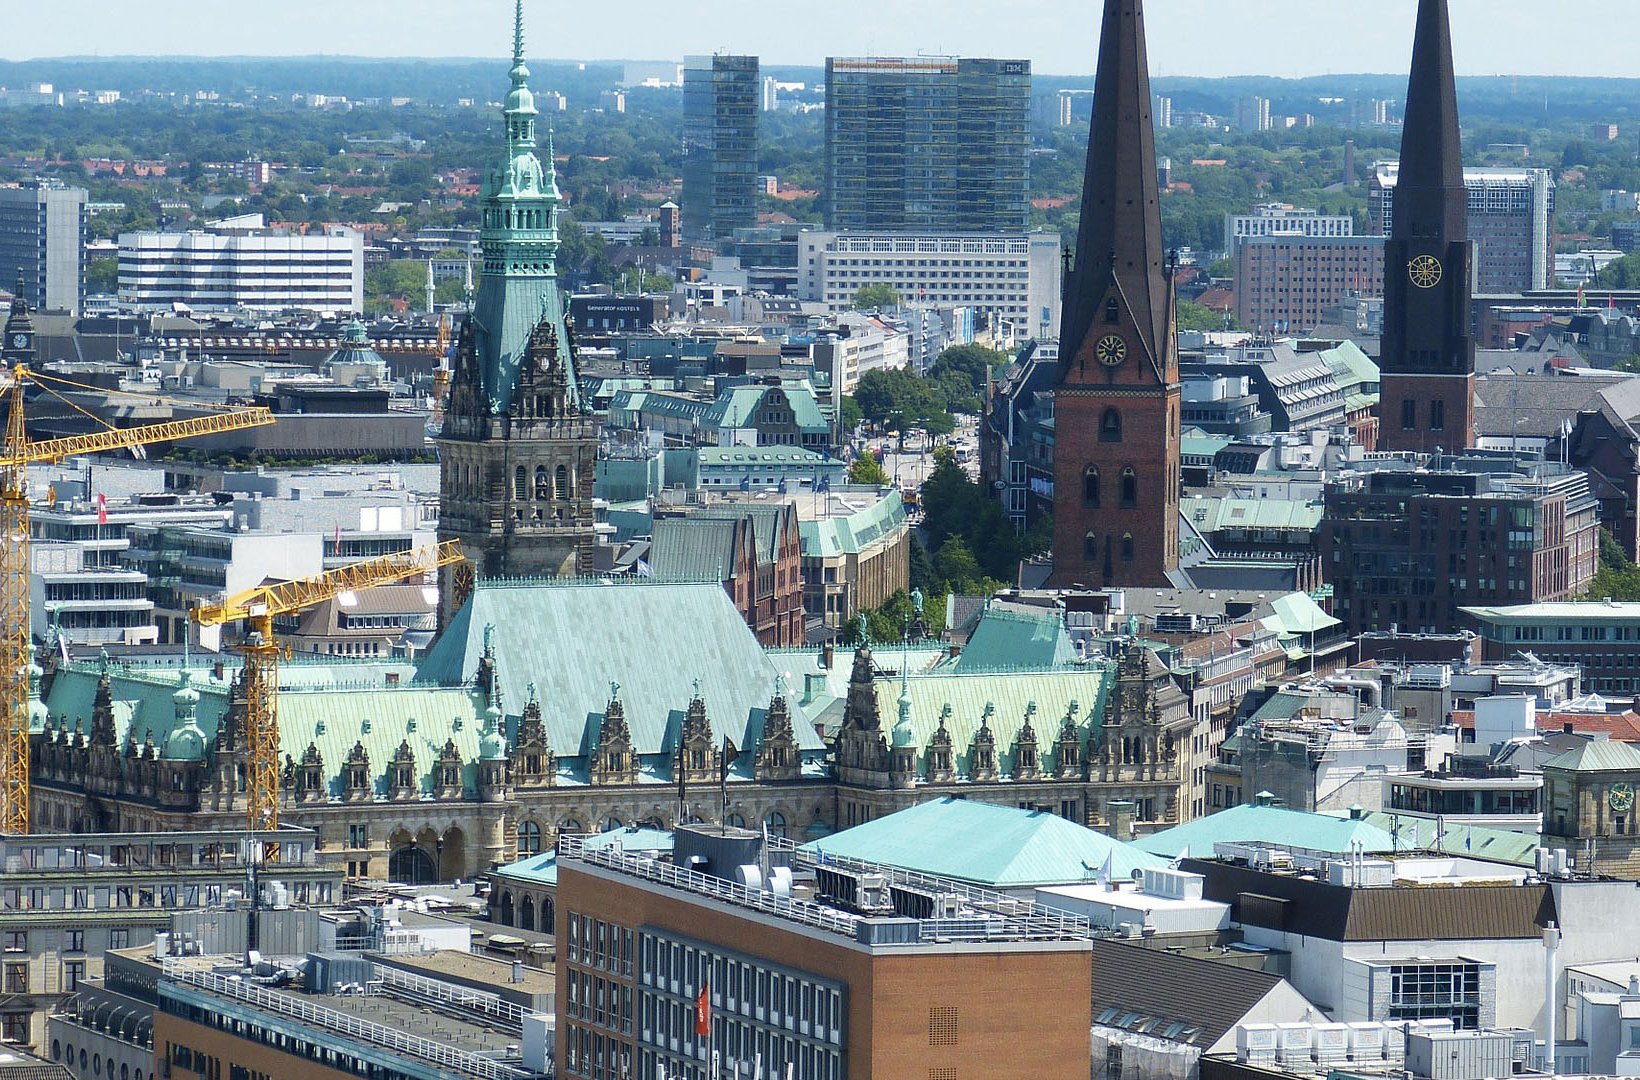 Buildings in the city of Hamburg